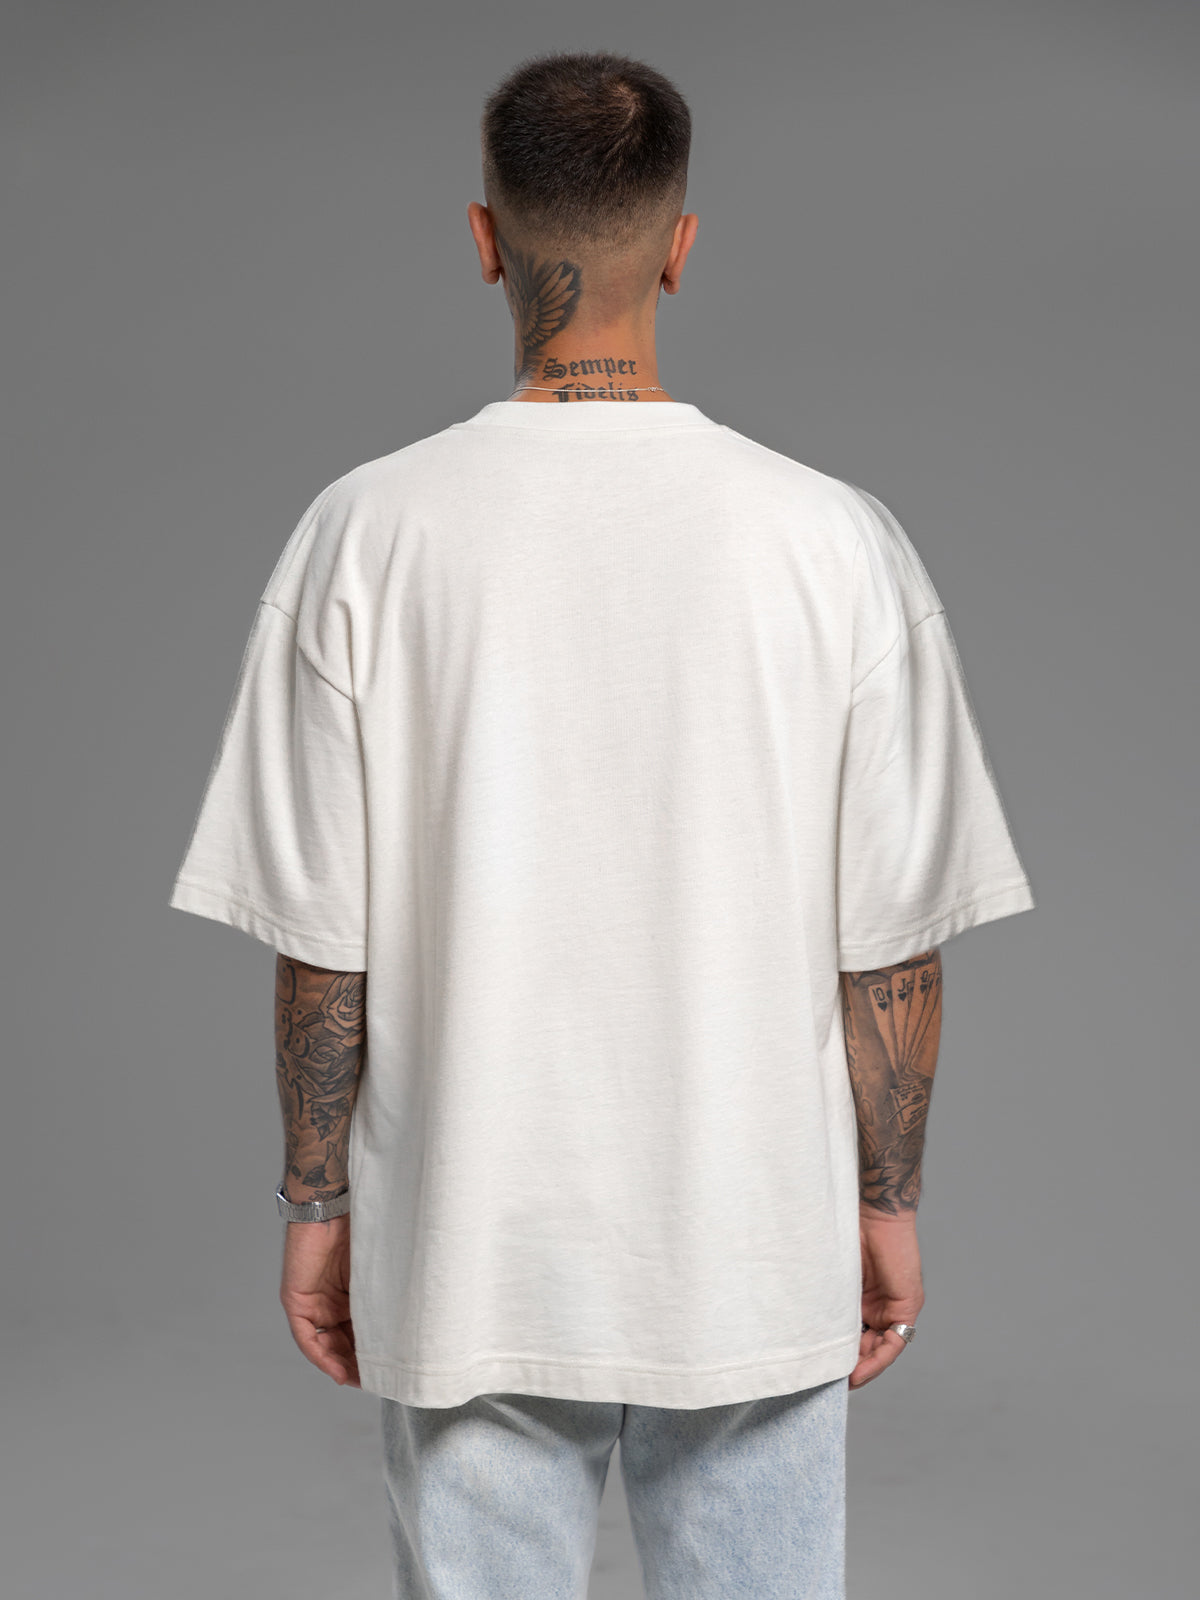 NATIONS T-SHIRT OFF WHITE